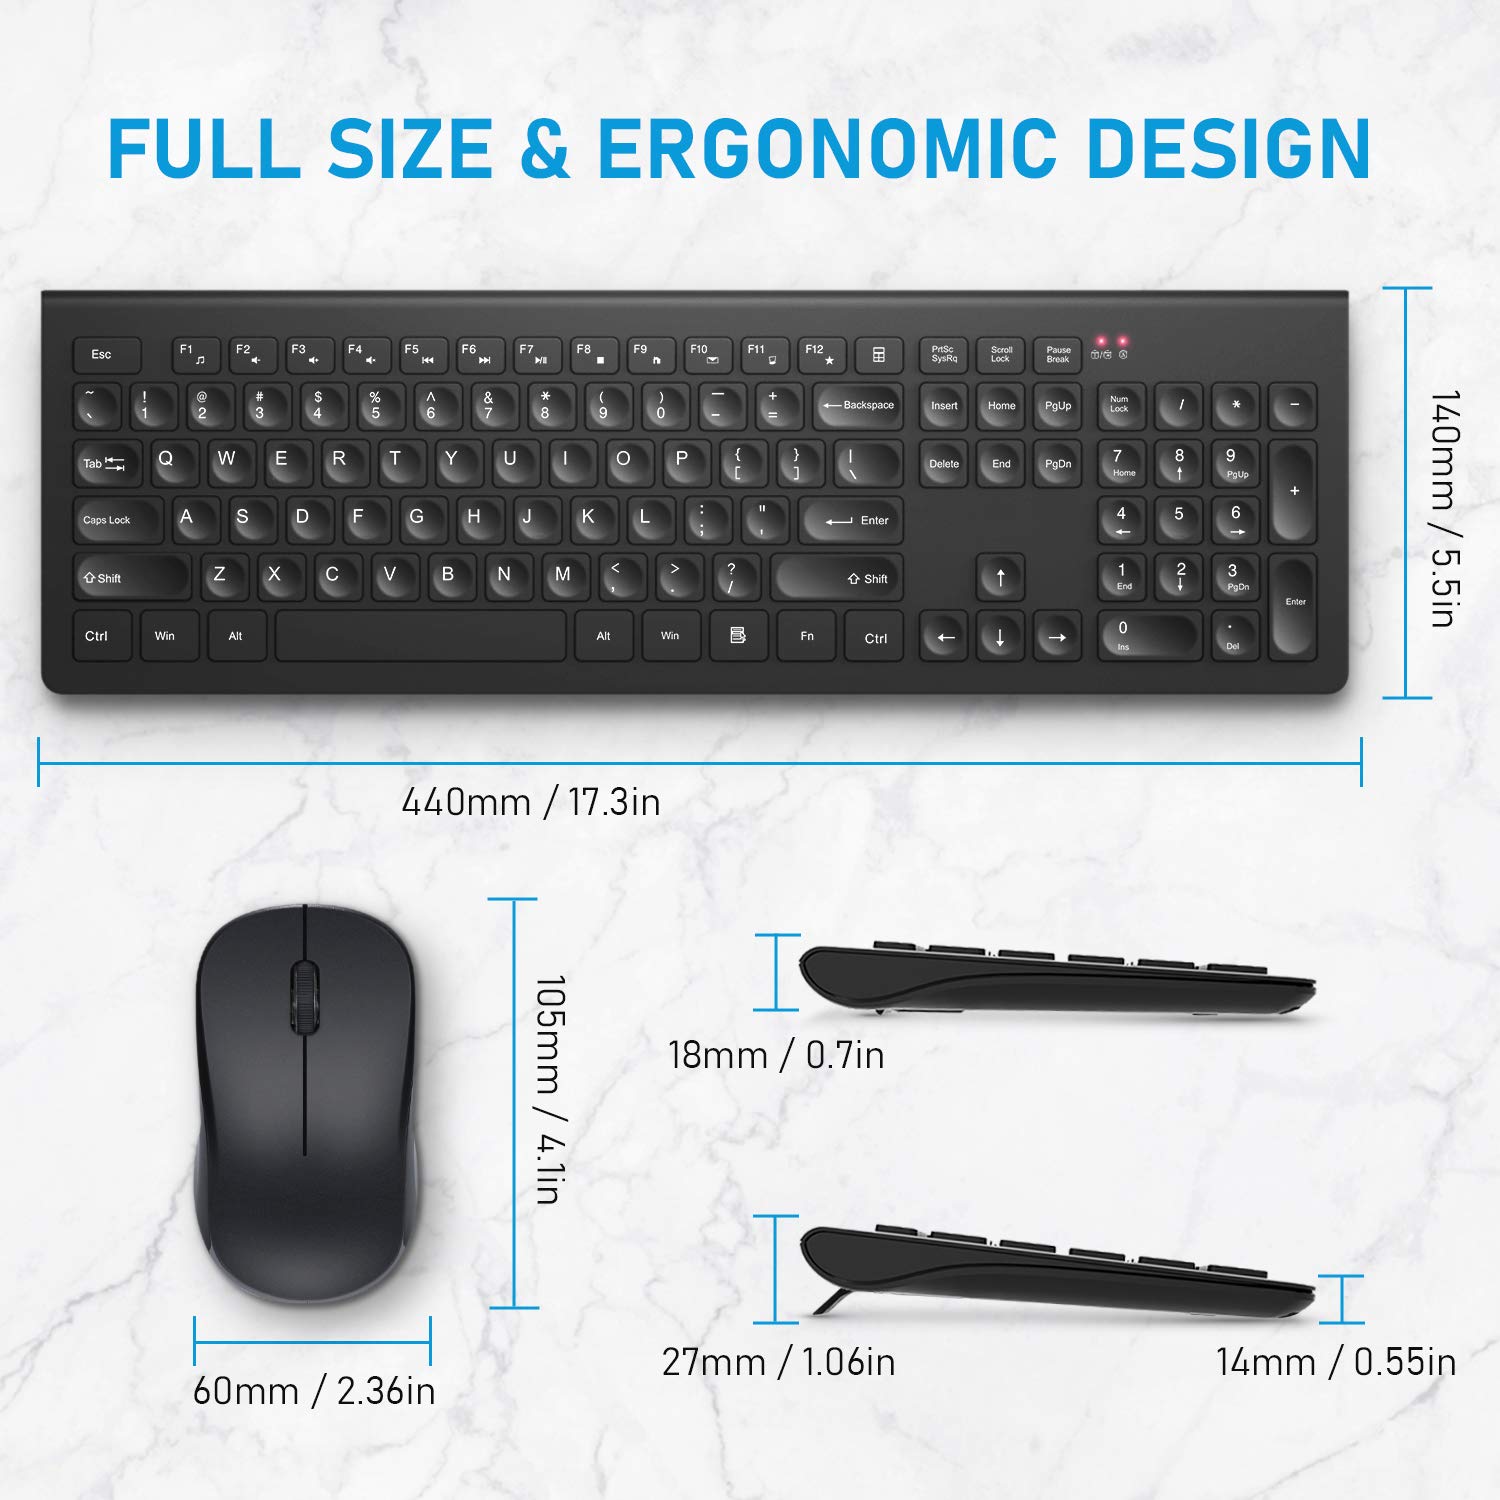 Wireless Keyboard and Mouse Combo, RATEL 2.4GHz Full Size USB Keyboard Mouse Ergonomic Quiet Keyboard Mouse Set for Laptop, PC, Mac, Computer, Desktop, Notebook, Windows(Black)